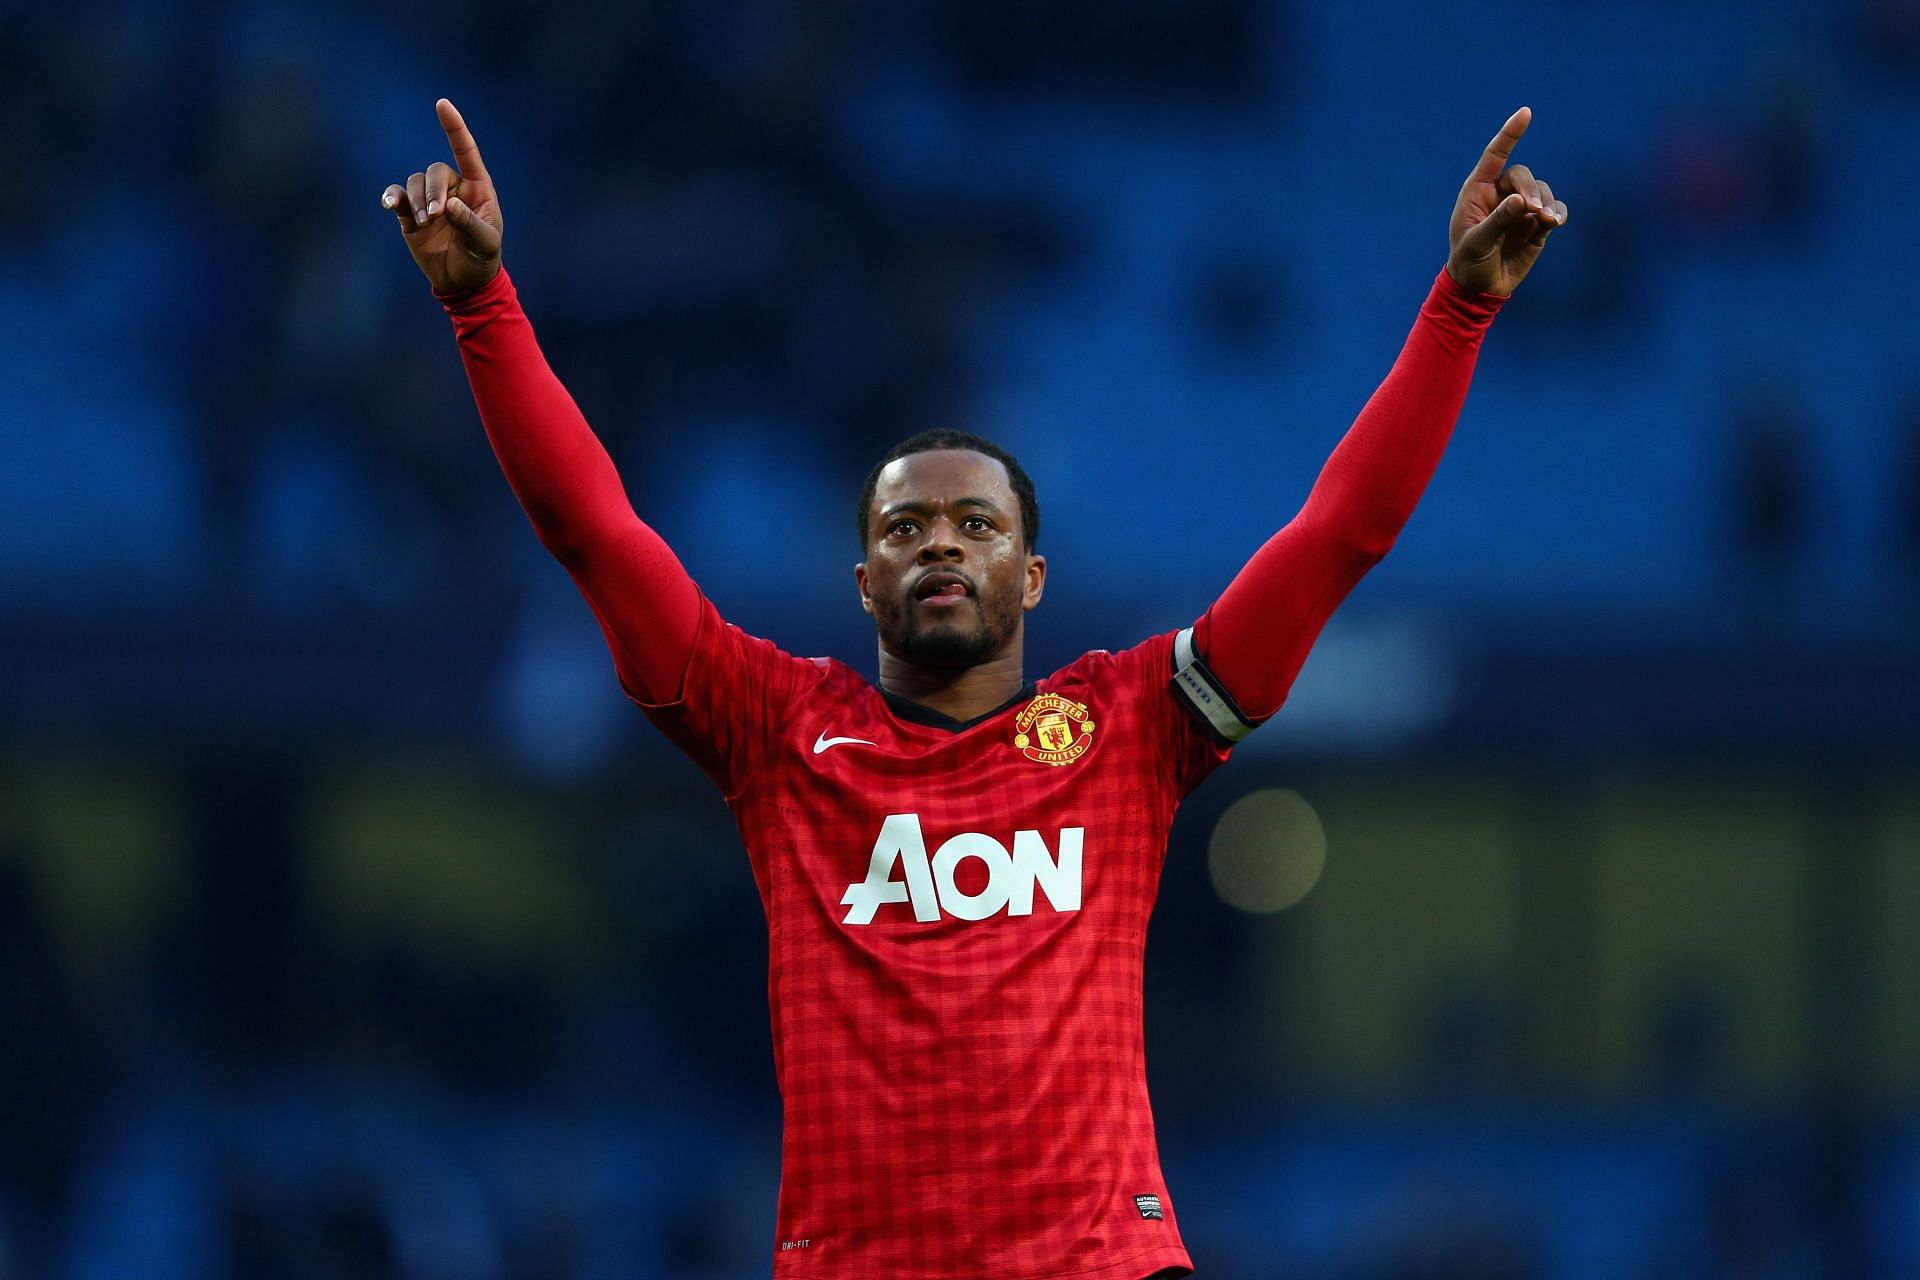 Patrice Evra was one of the best players in the world in his position during his prime.